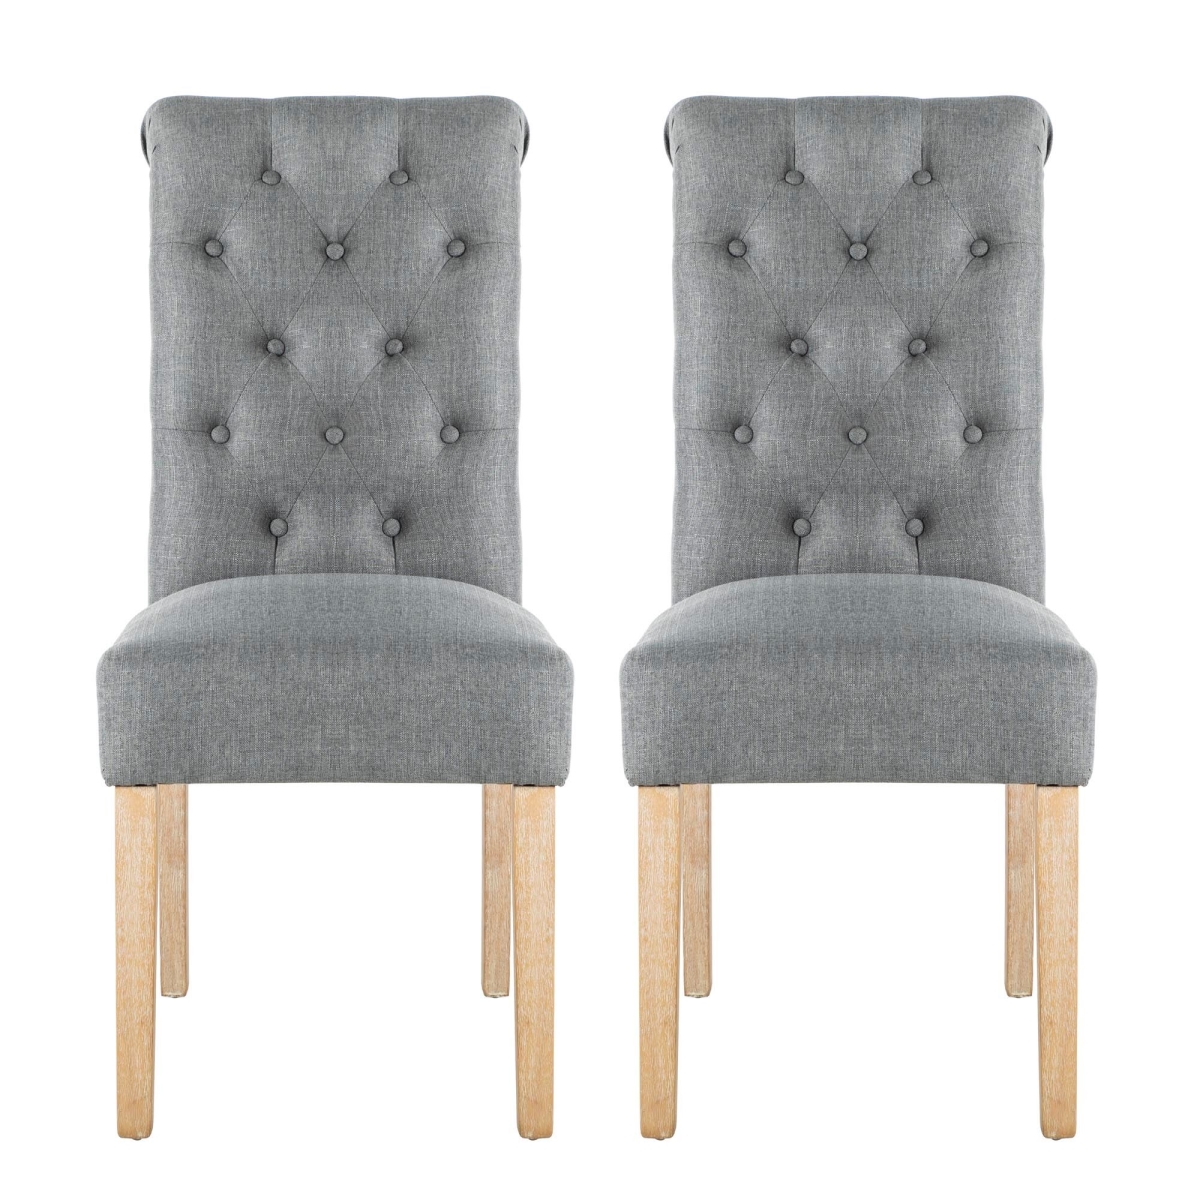 Ow-my8010t-gray High Back Button Tufting Fabric Upholstered Dining Chairs, Gray - Set Of 2